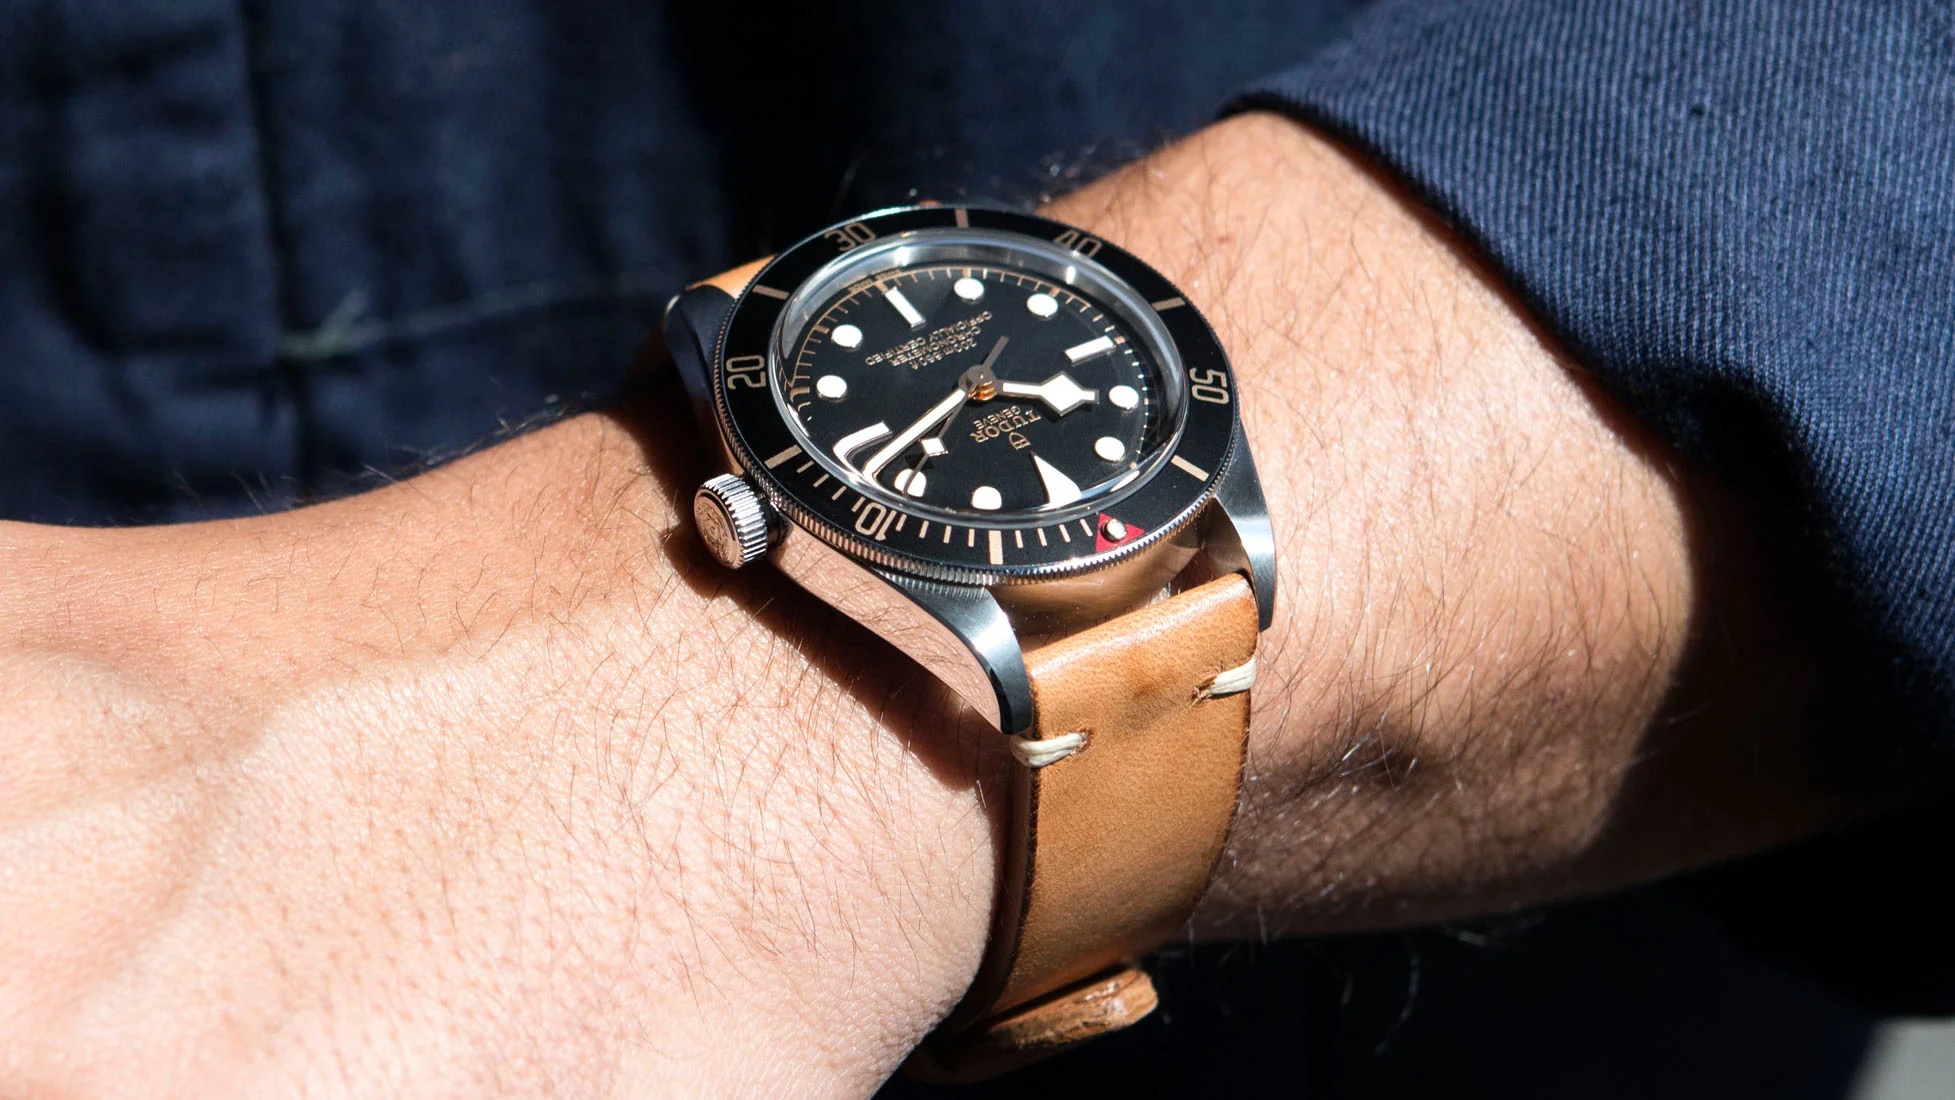 Buyer’s Tips for Purchasing a High-End Watch Online